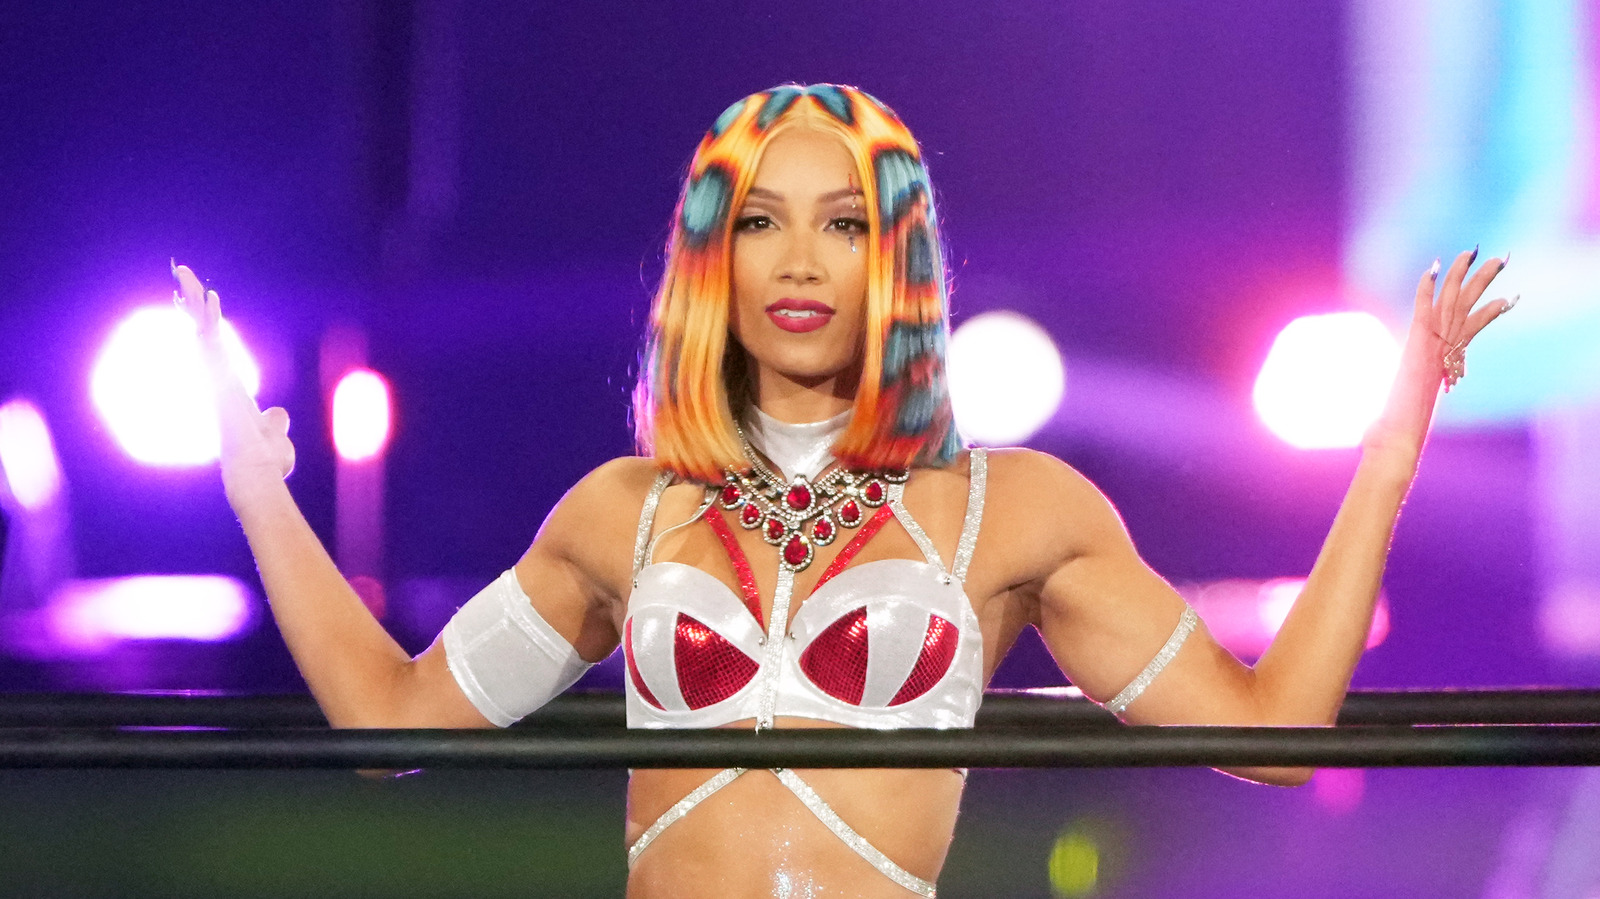 AEW star Mercedes Mone tells when she fell in love with wrestling